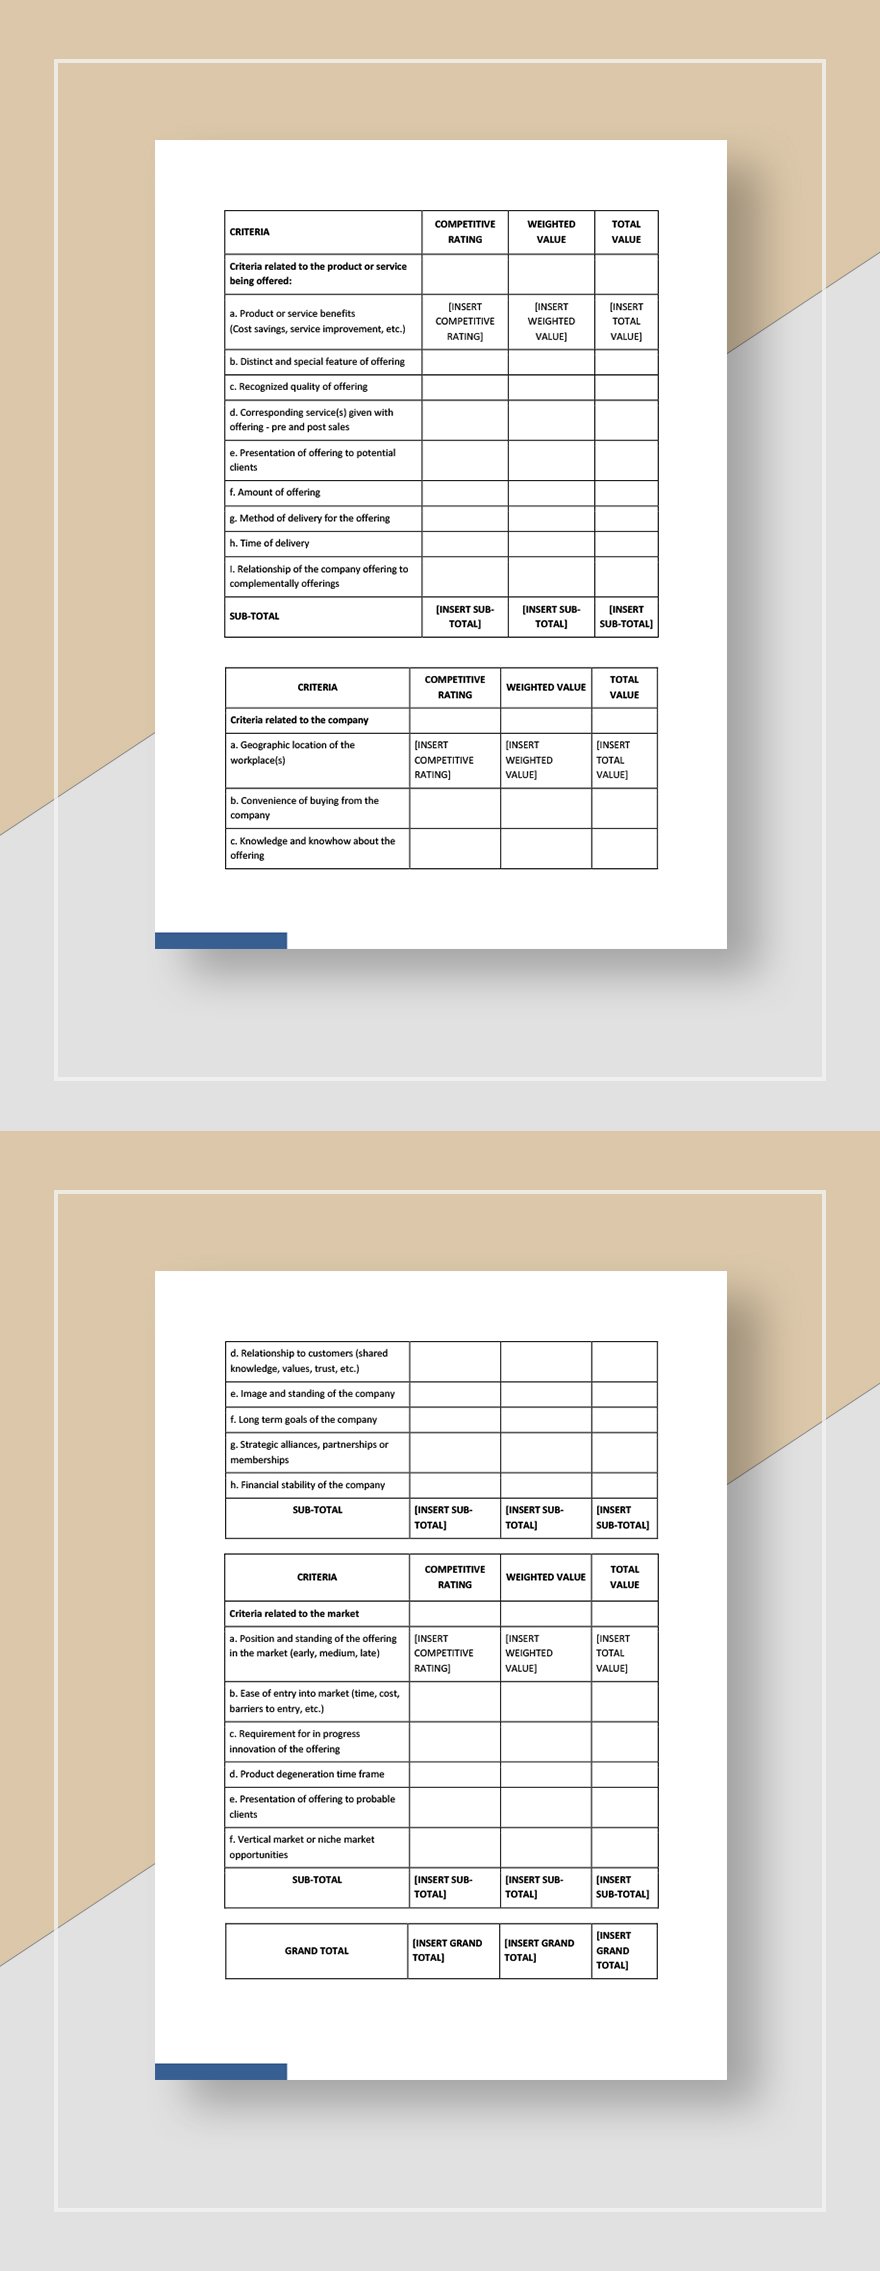 Products and Services Differentiation Worksheet Template